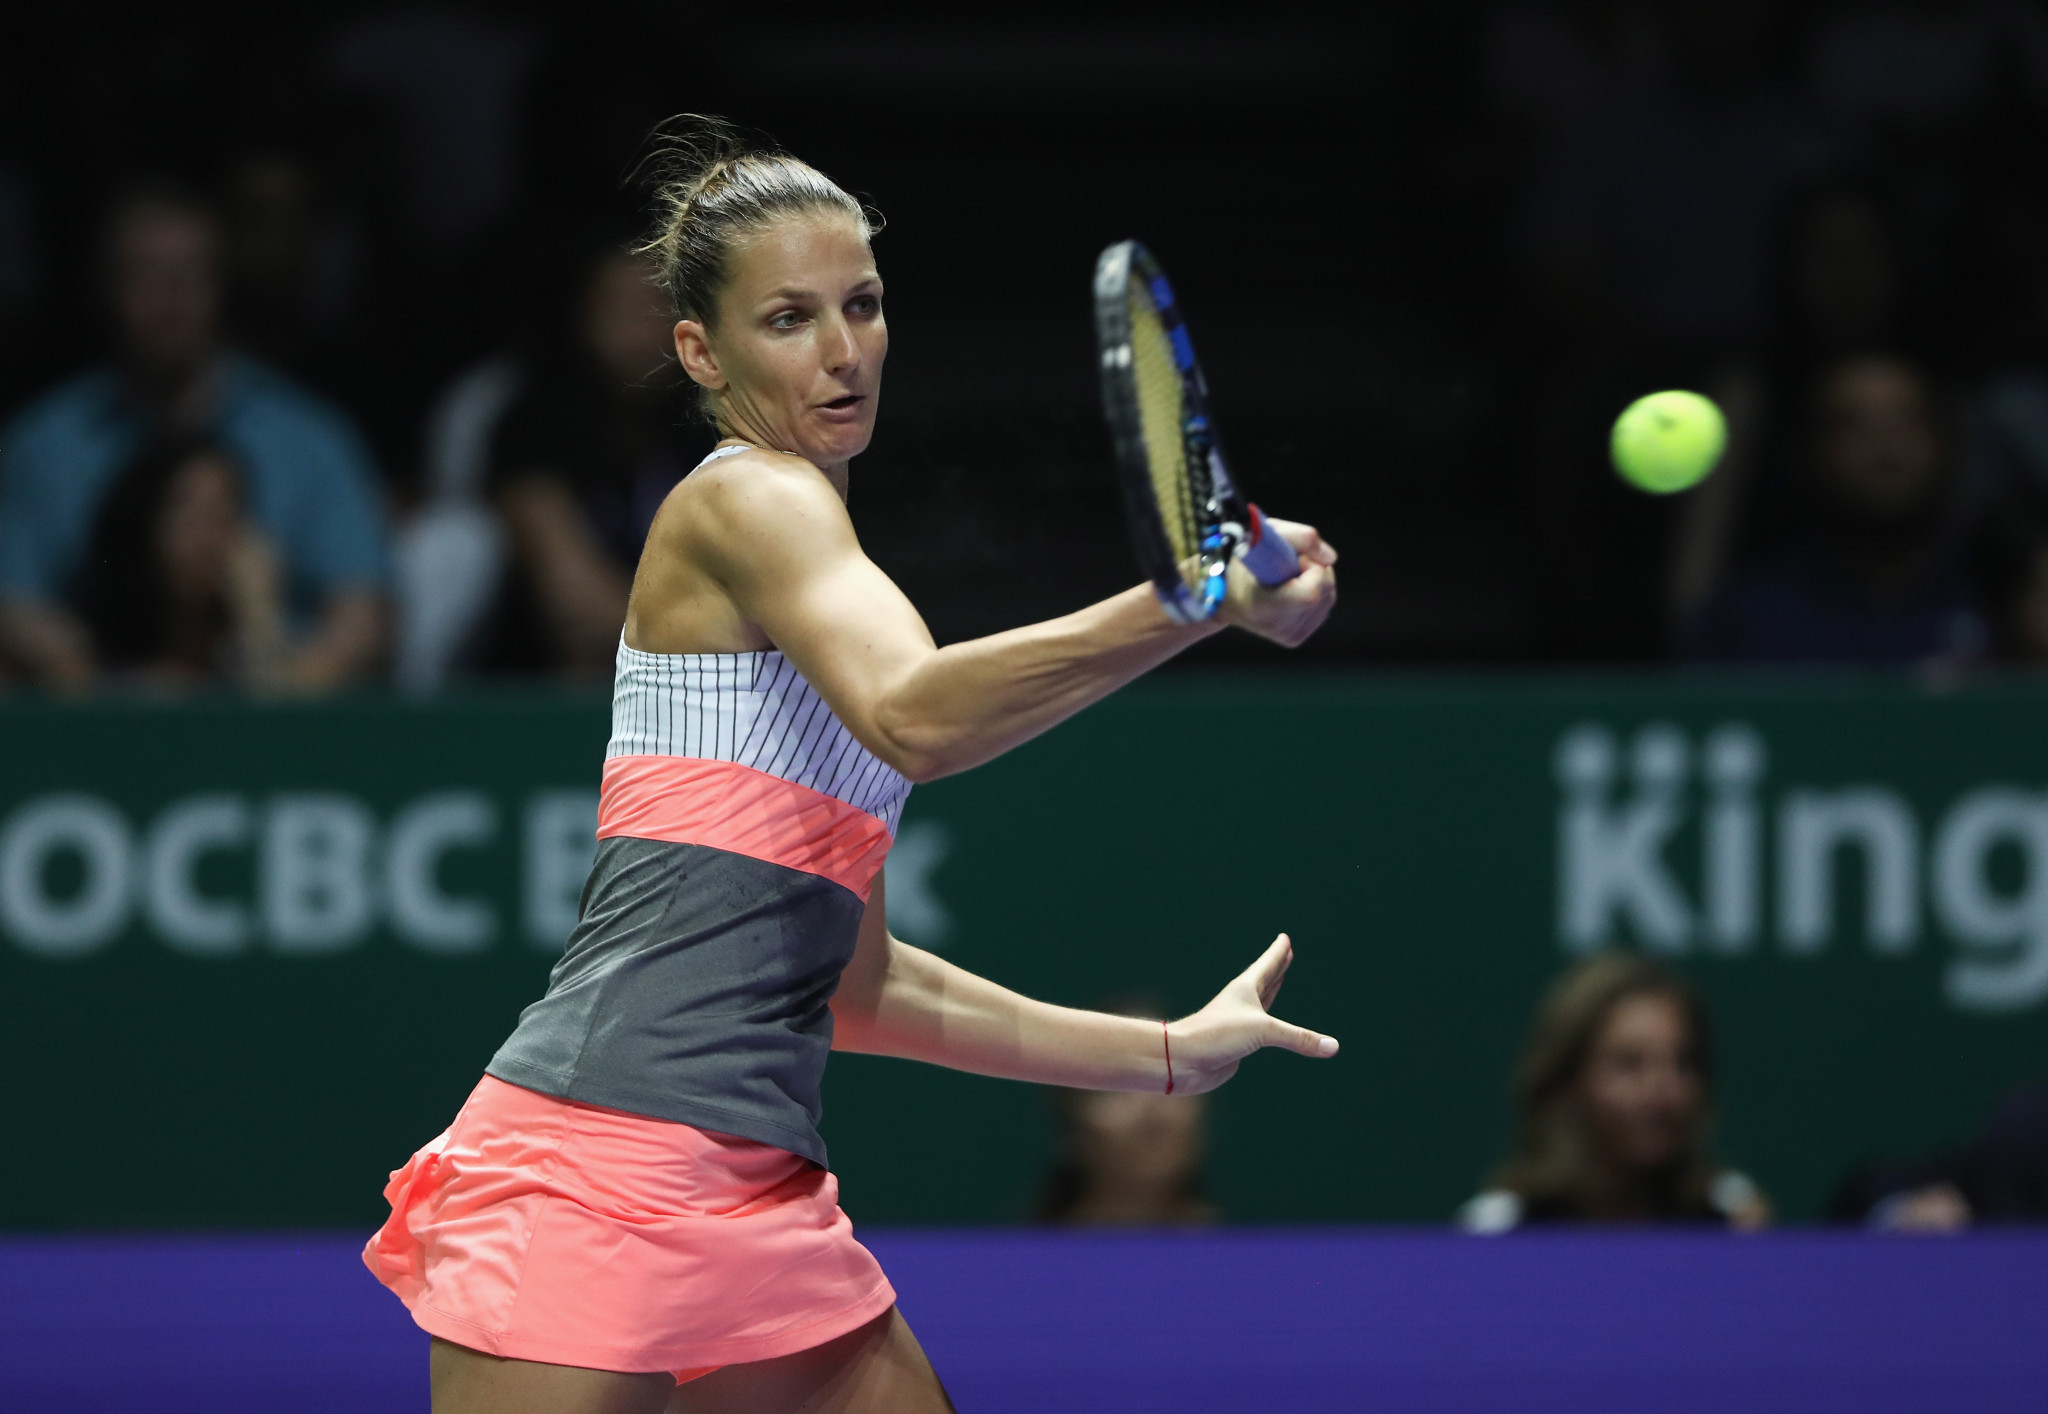 The Czech Republic's Karolina Pliskova was a winner at the WTA Finals in Singapore today ©Getty Images